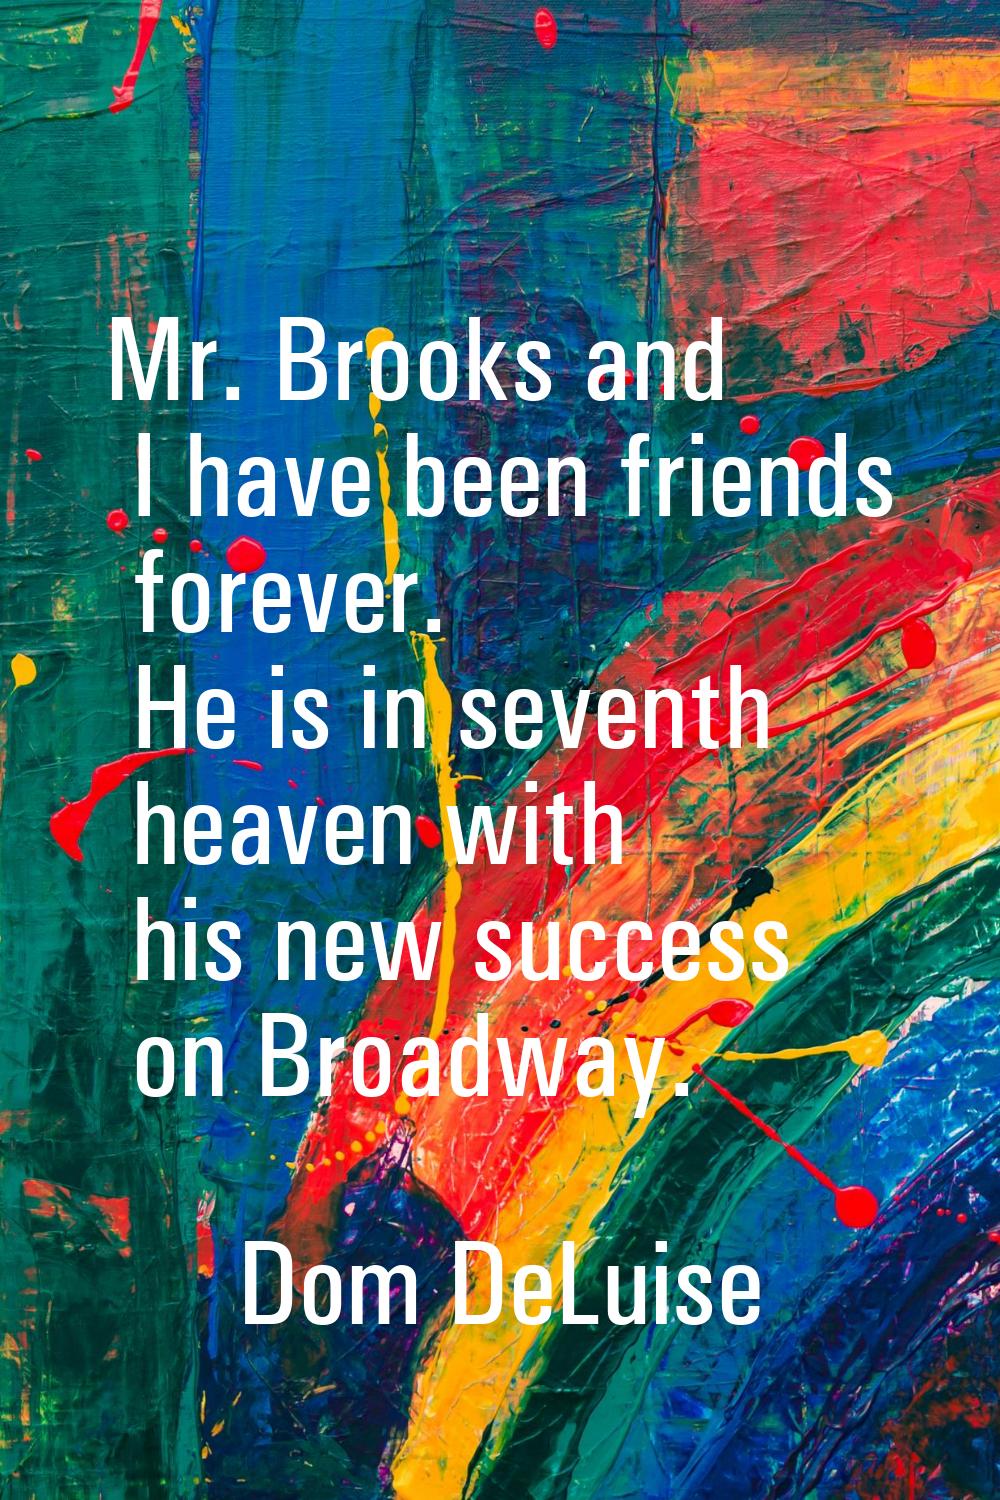 Mr. Brooks and I have been friends forever. He is in seventh heaven with his new success on Broadwa